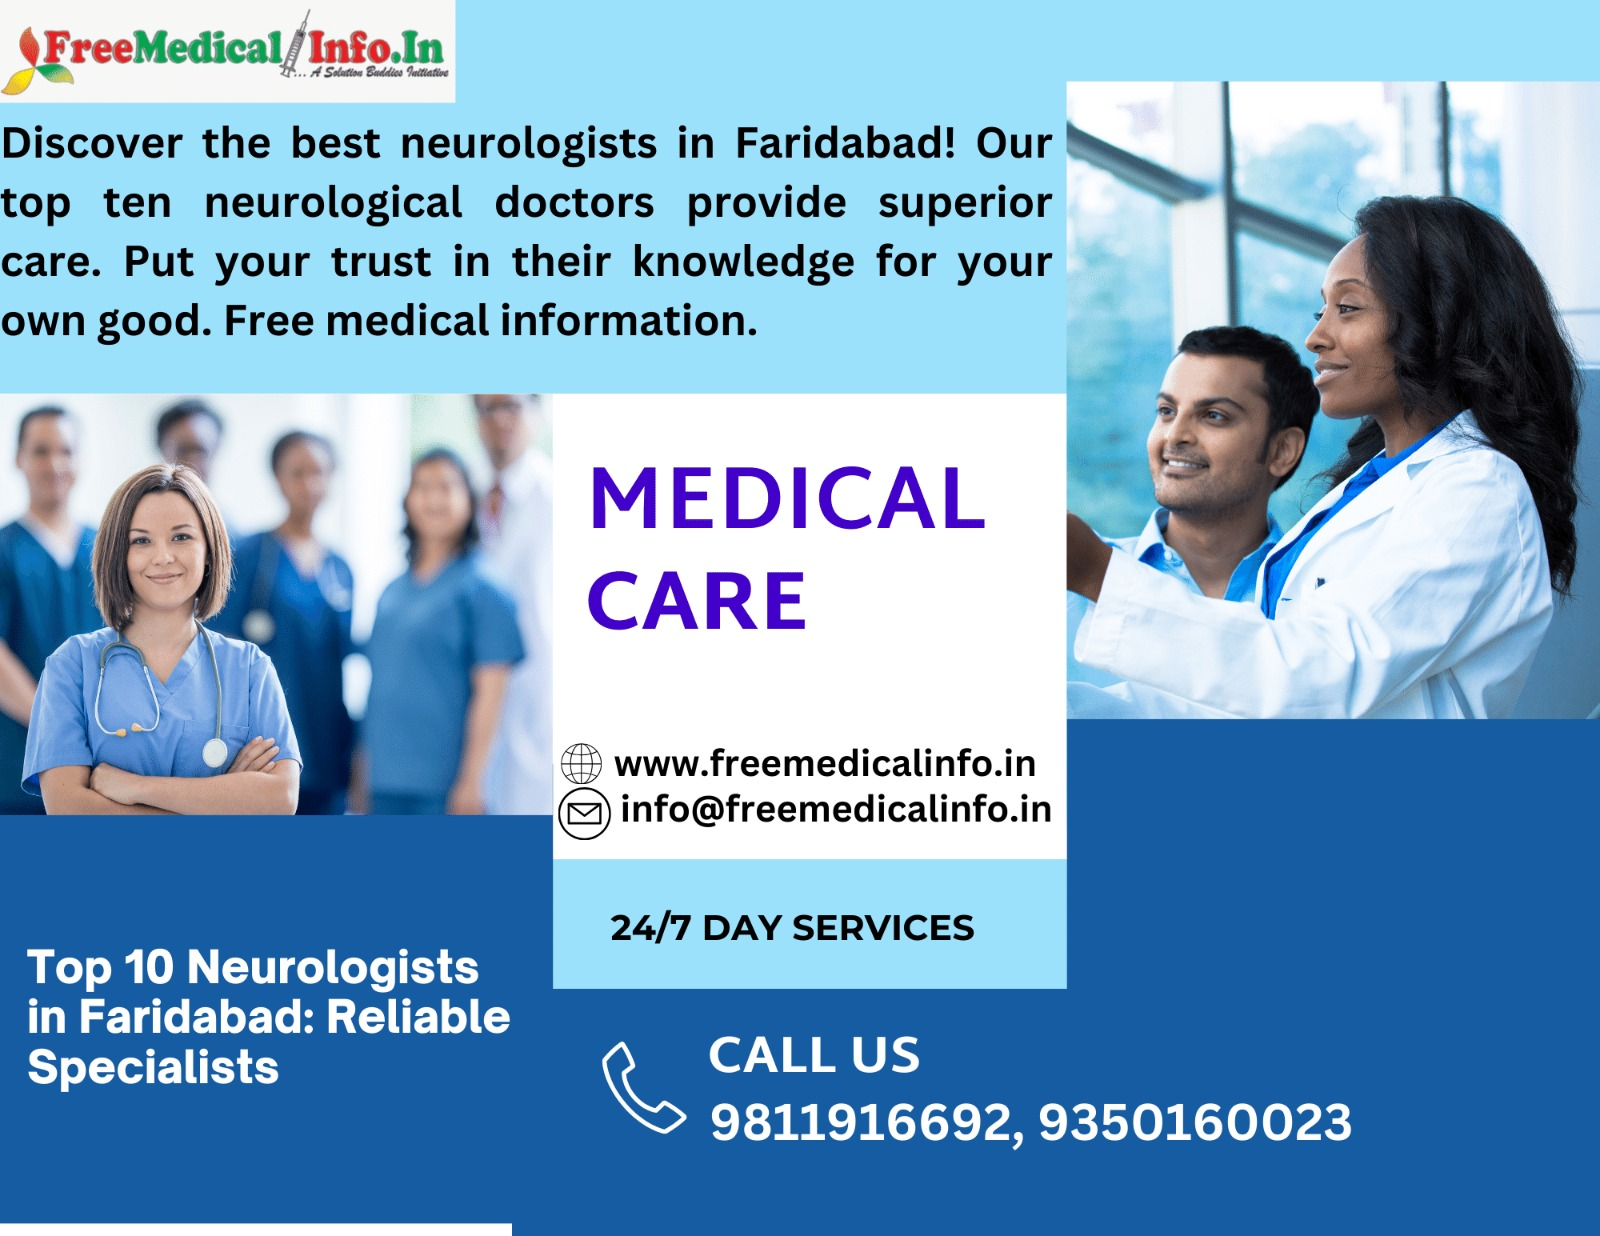 Find the finest neurologists in Faridabad! The top ten specialists for neurological diseases have been announced. Schedule appointments for compassionate and cutting-edge treatments.